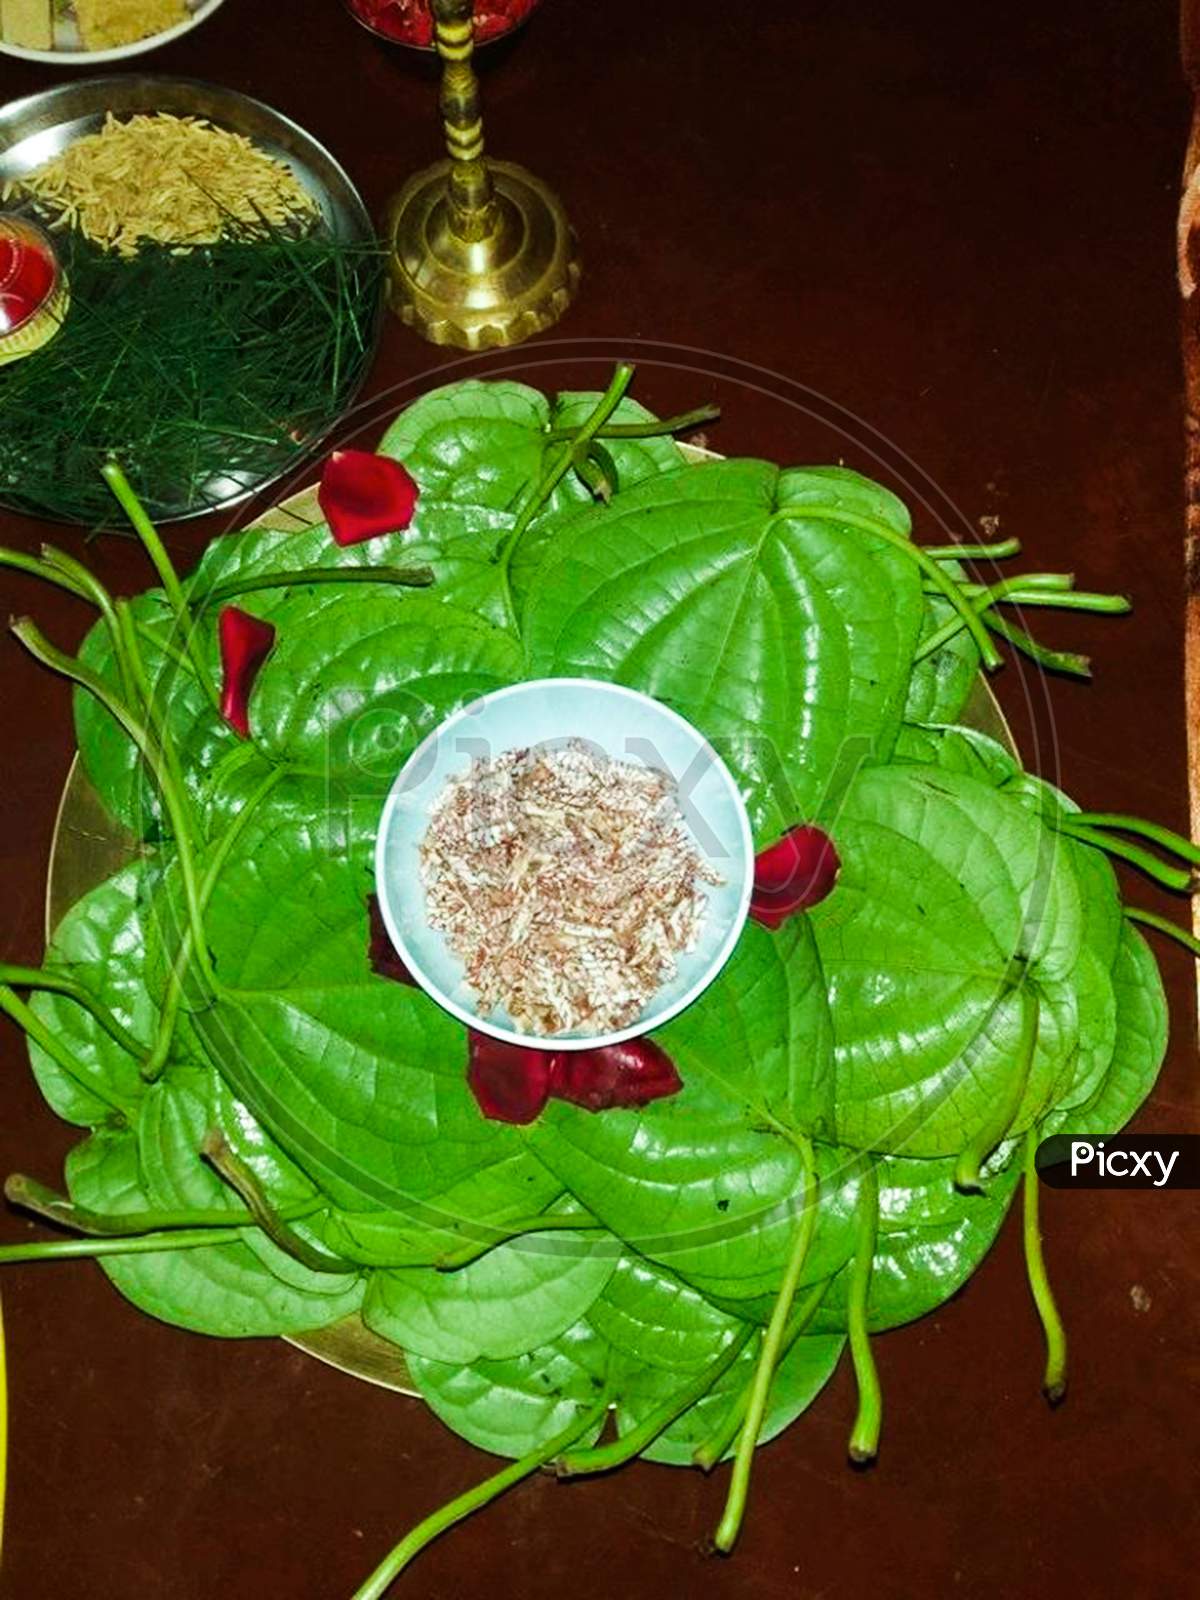 Hindu Marriage Ceremony Preparation With Betel Leaves And Nuts